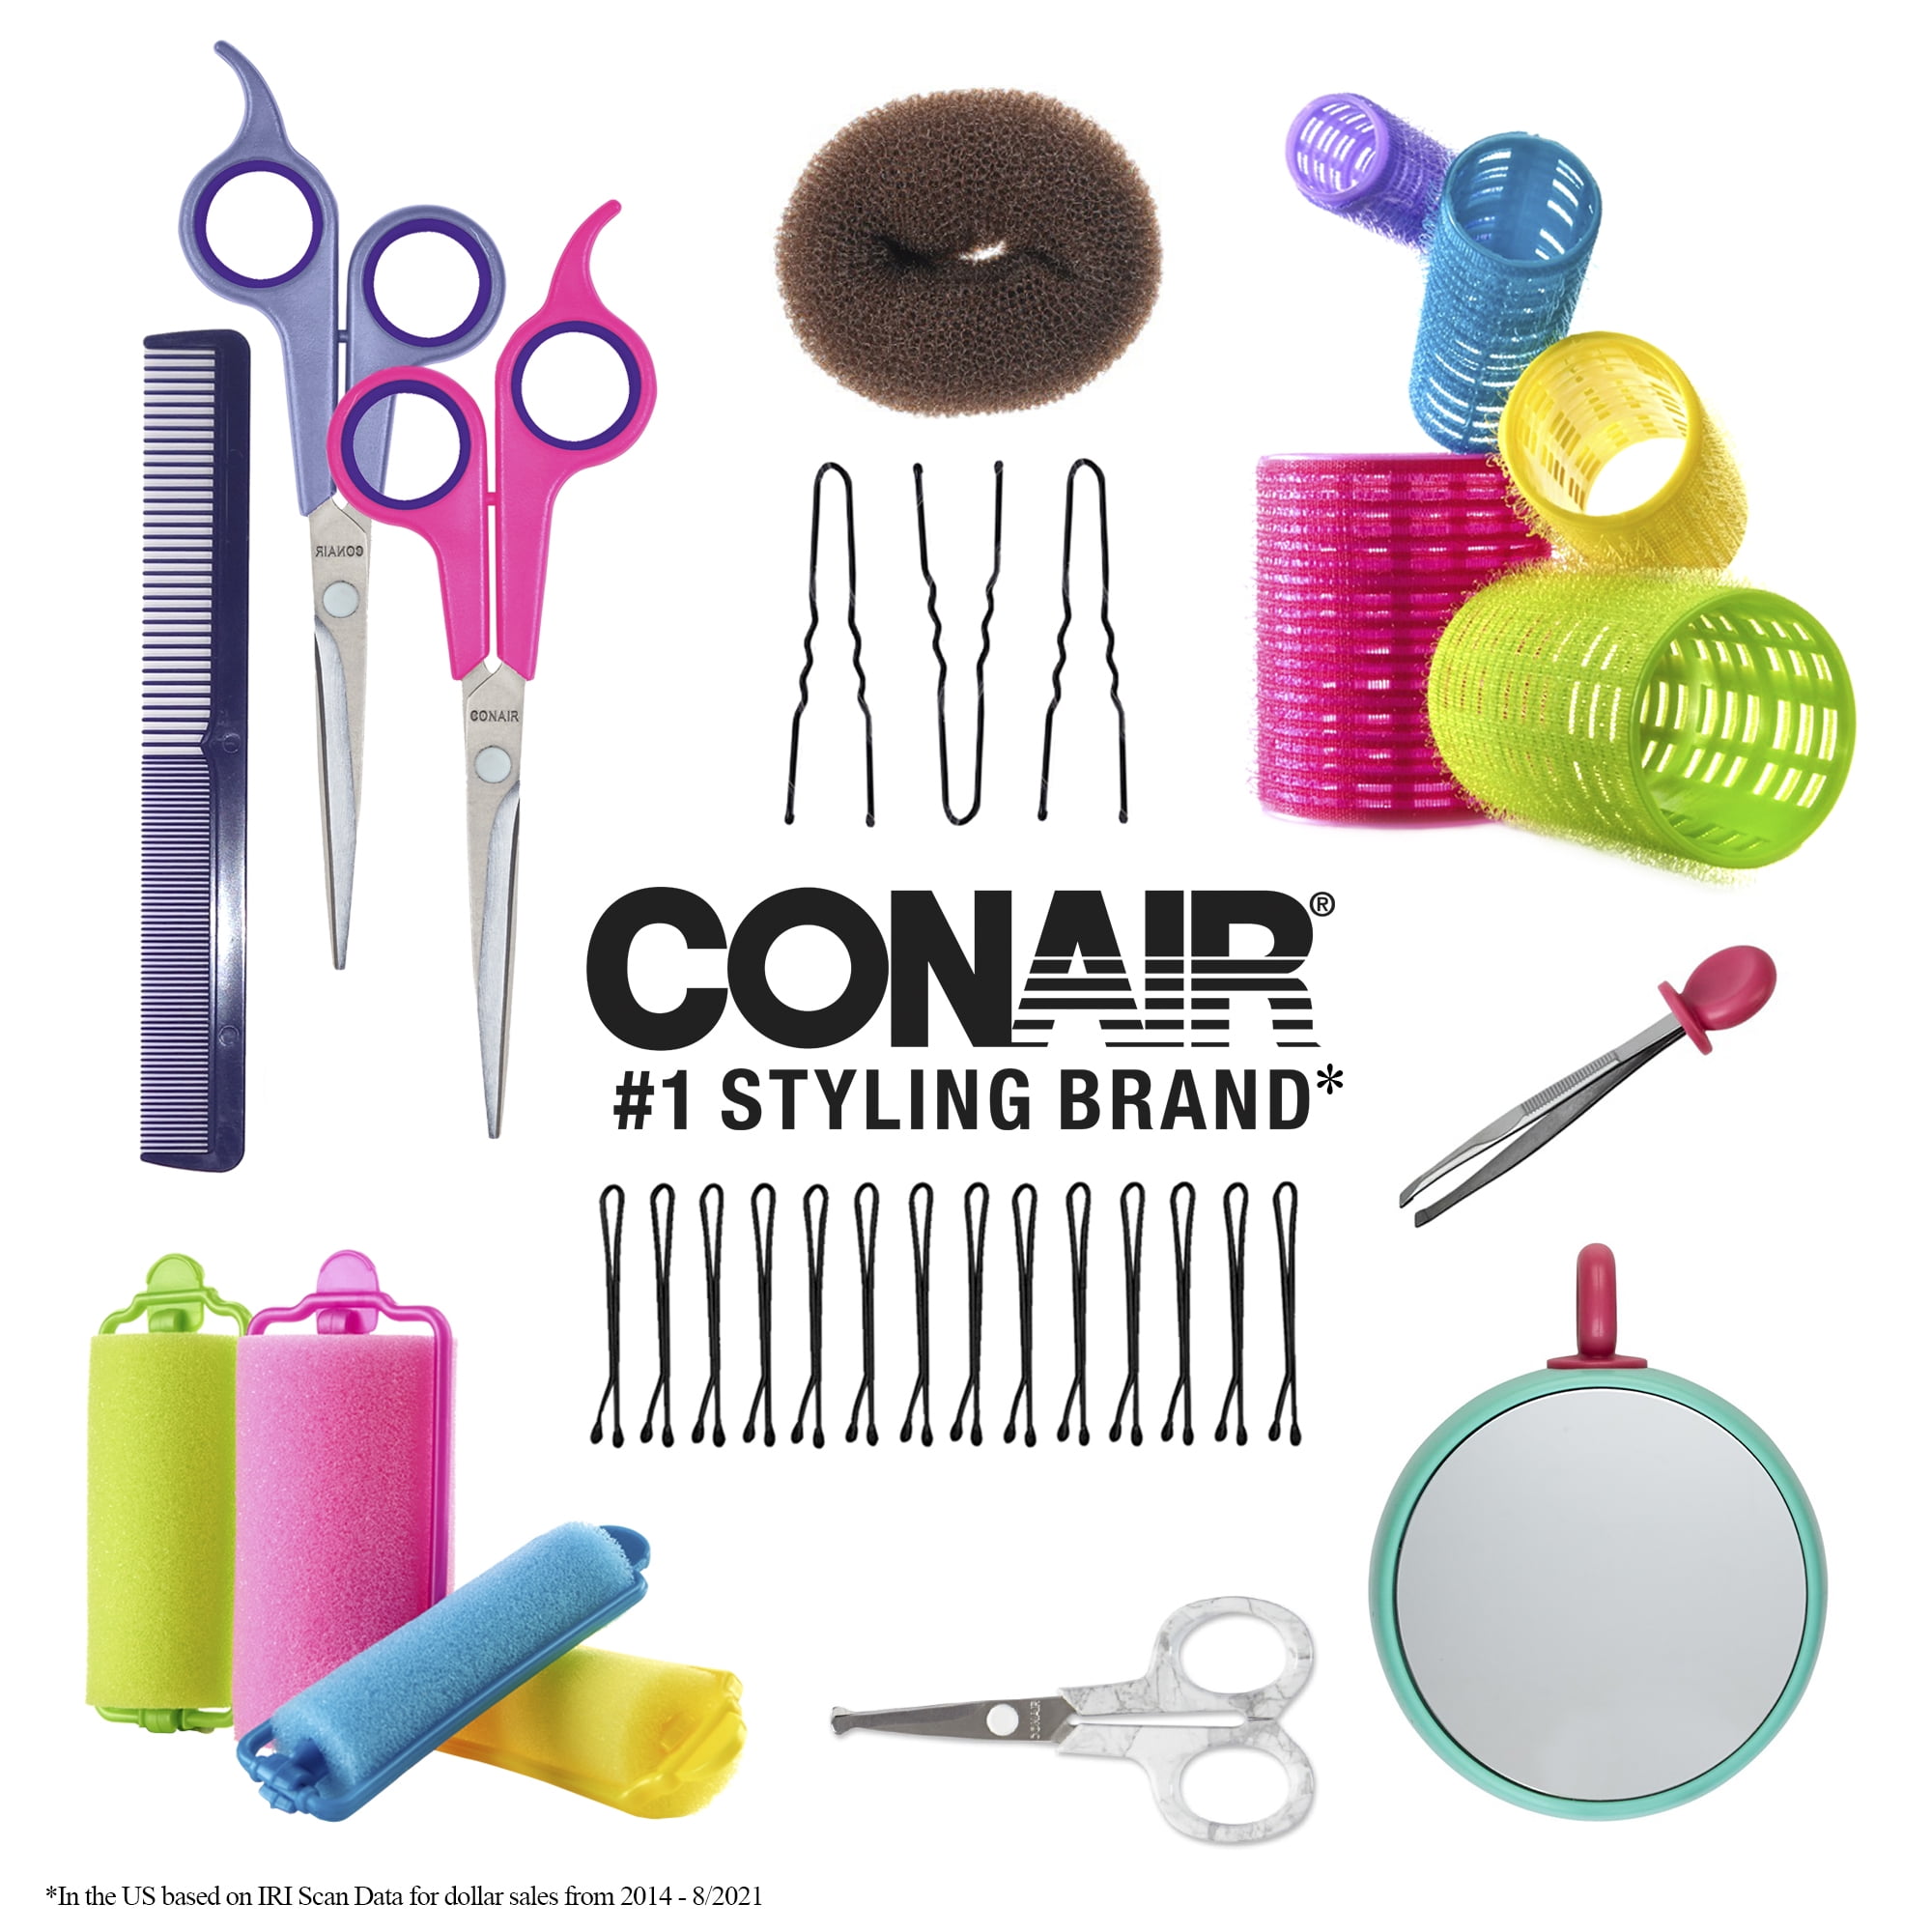 Conair Curved Bobby Pins for Pin Ups and Simple Styling Across All Hair ...